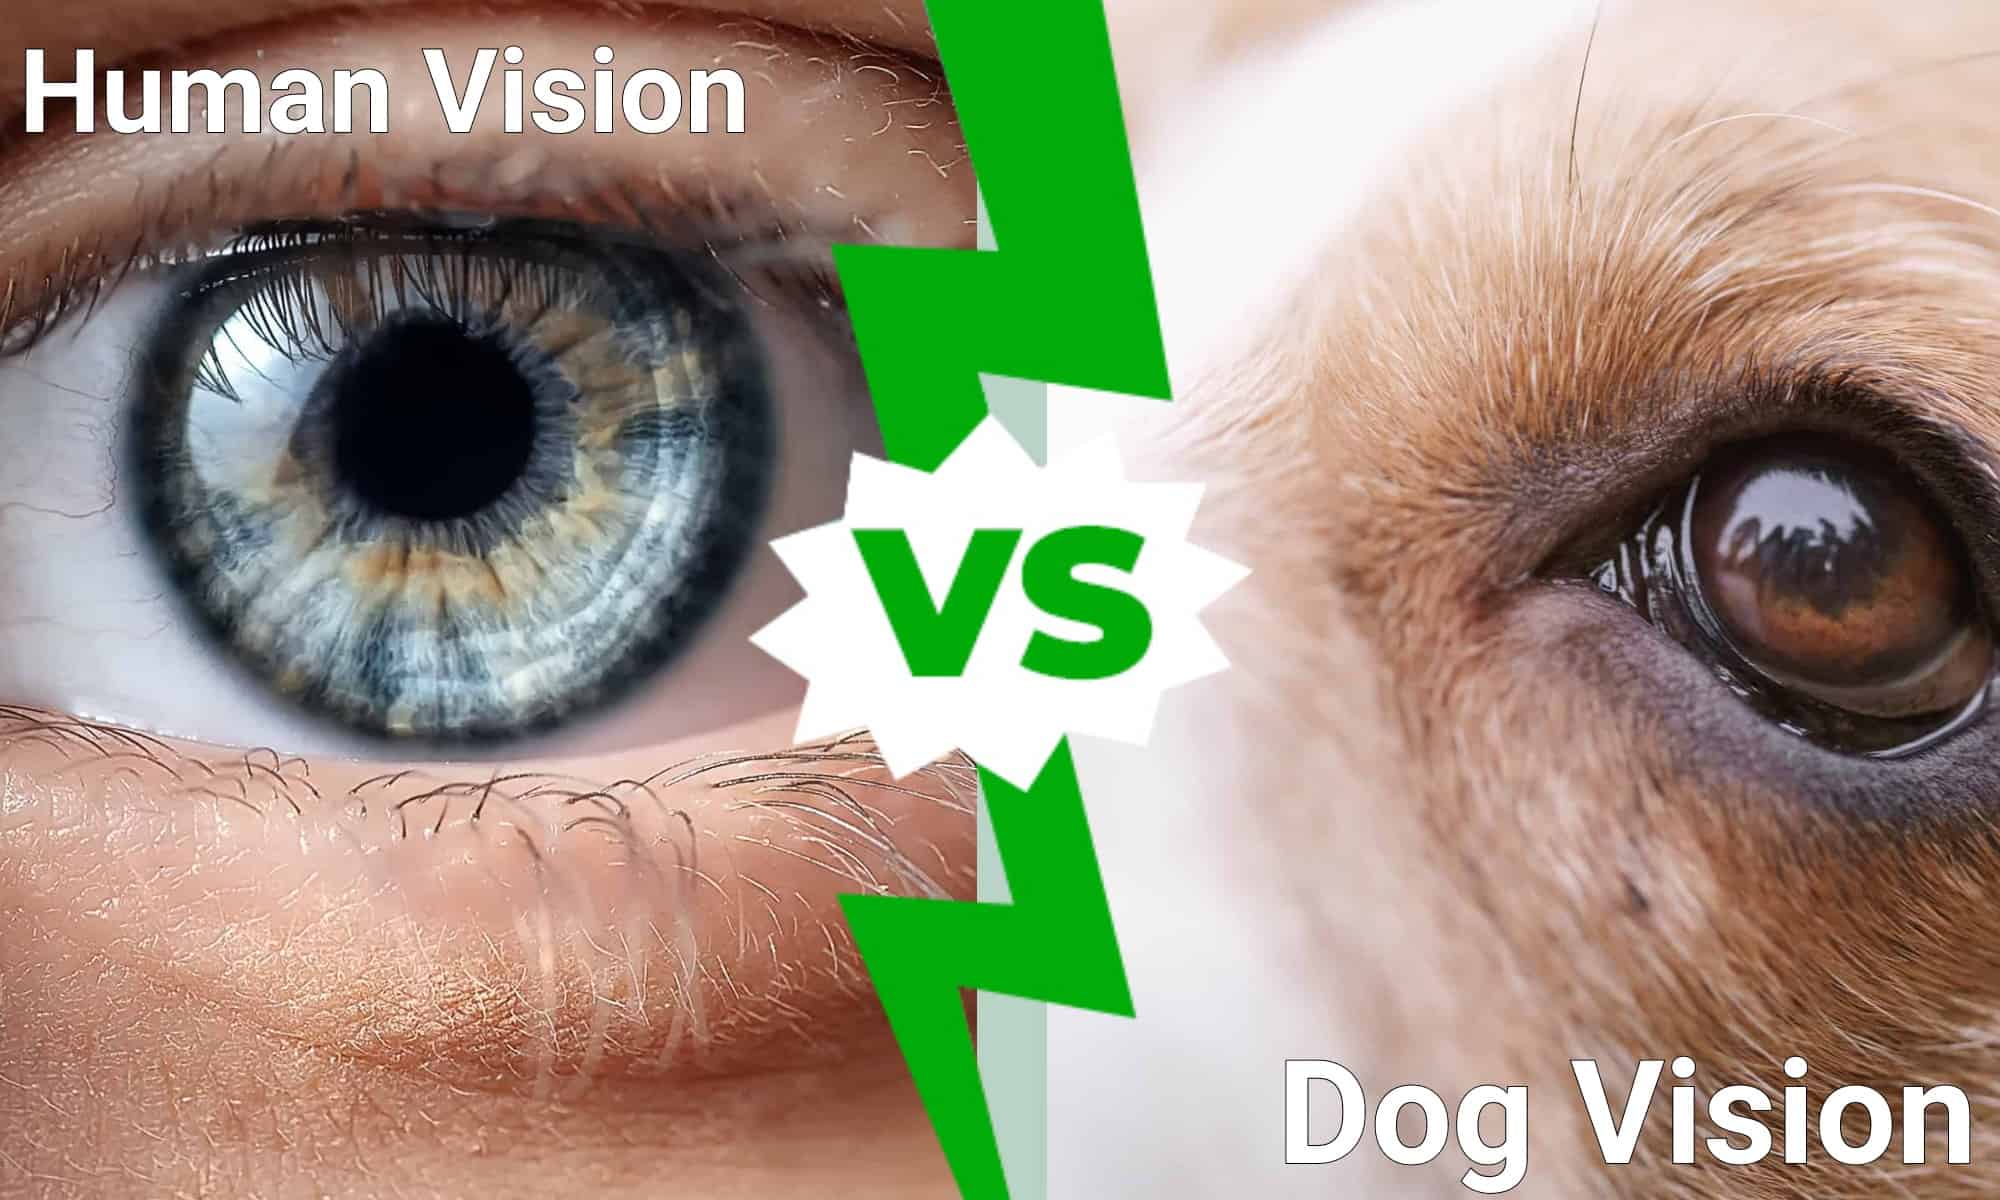 Can Humans Use Dogs Eyes